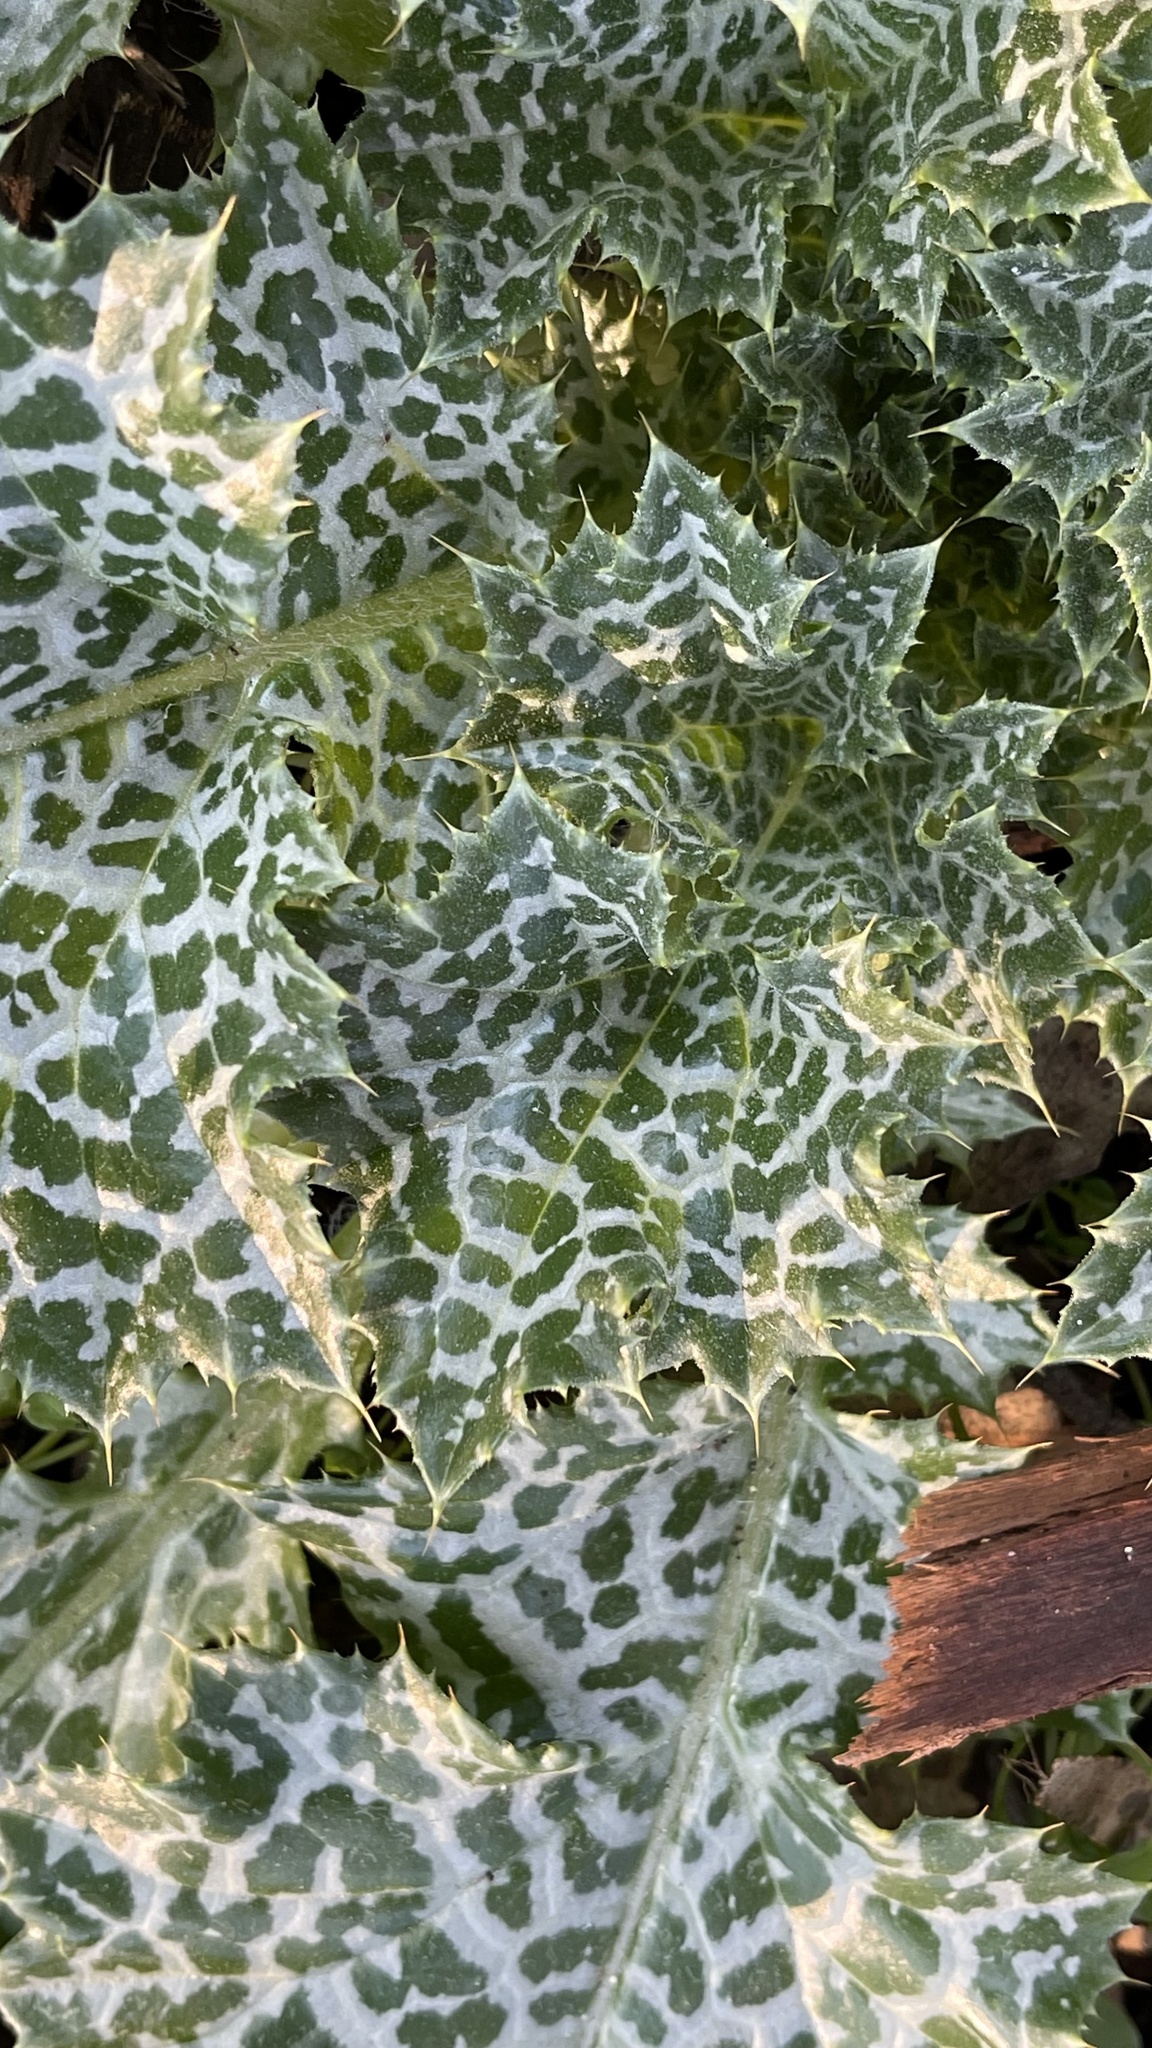 A close-up of a Silybum marianum rosette, showing extensive white patterning on pretty much all of the veins